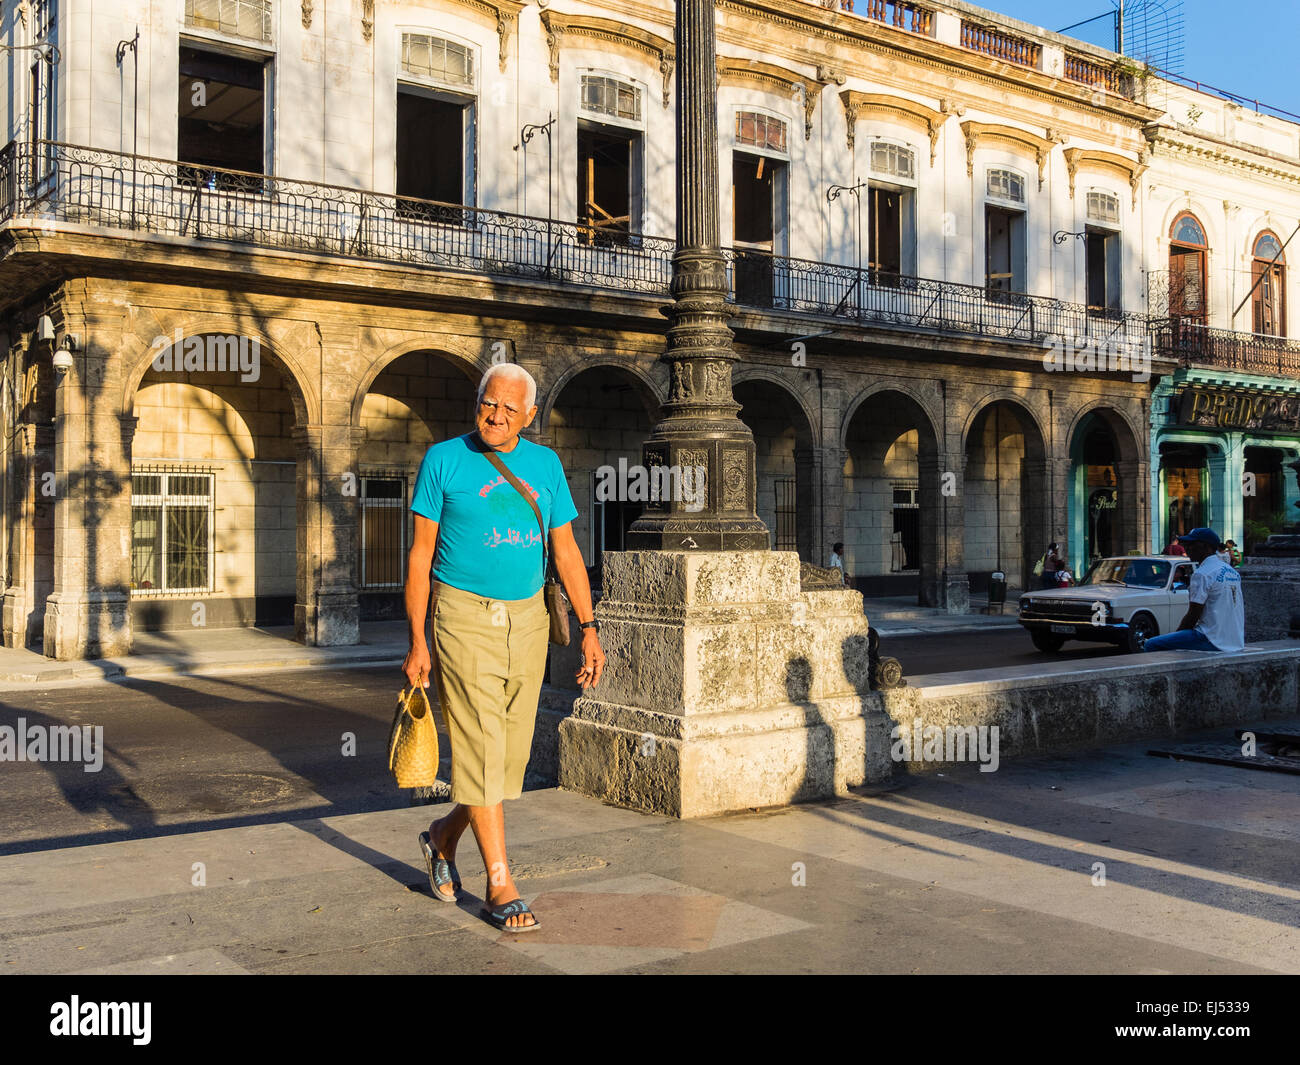 A male senior citizen with gray hair walks in the early morning light in Havana. Stock Photo